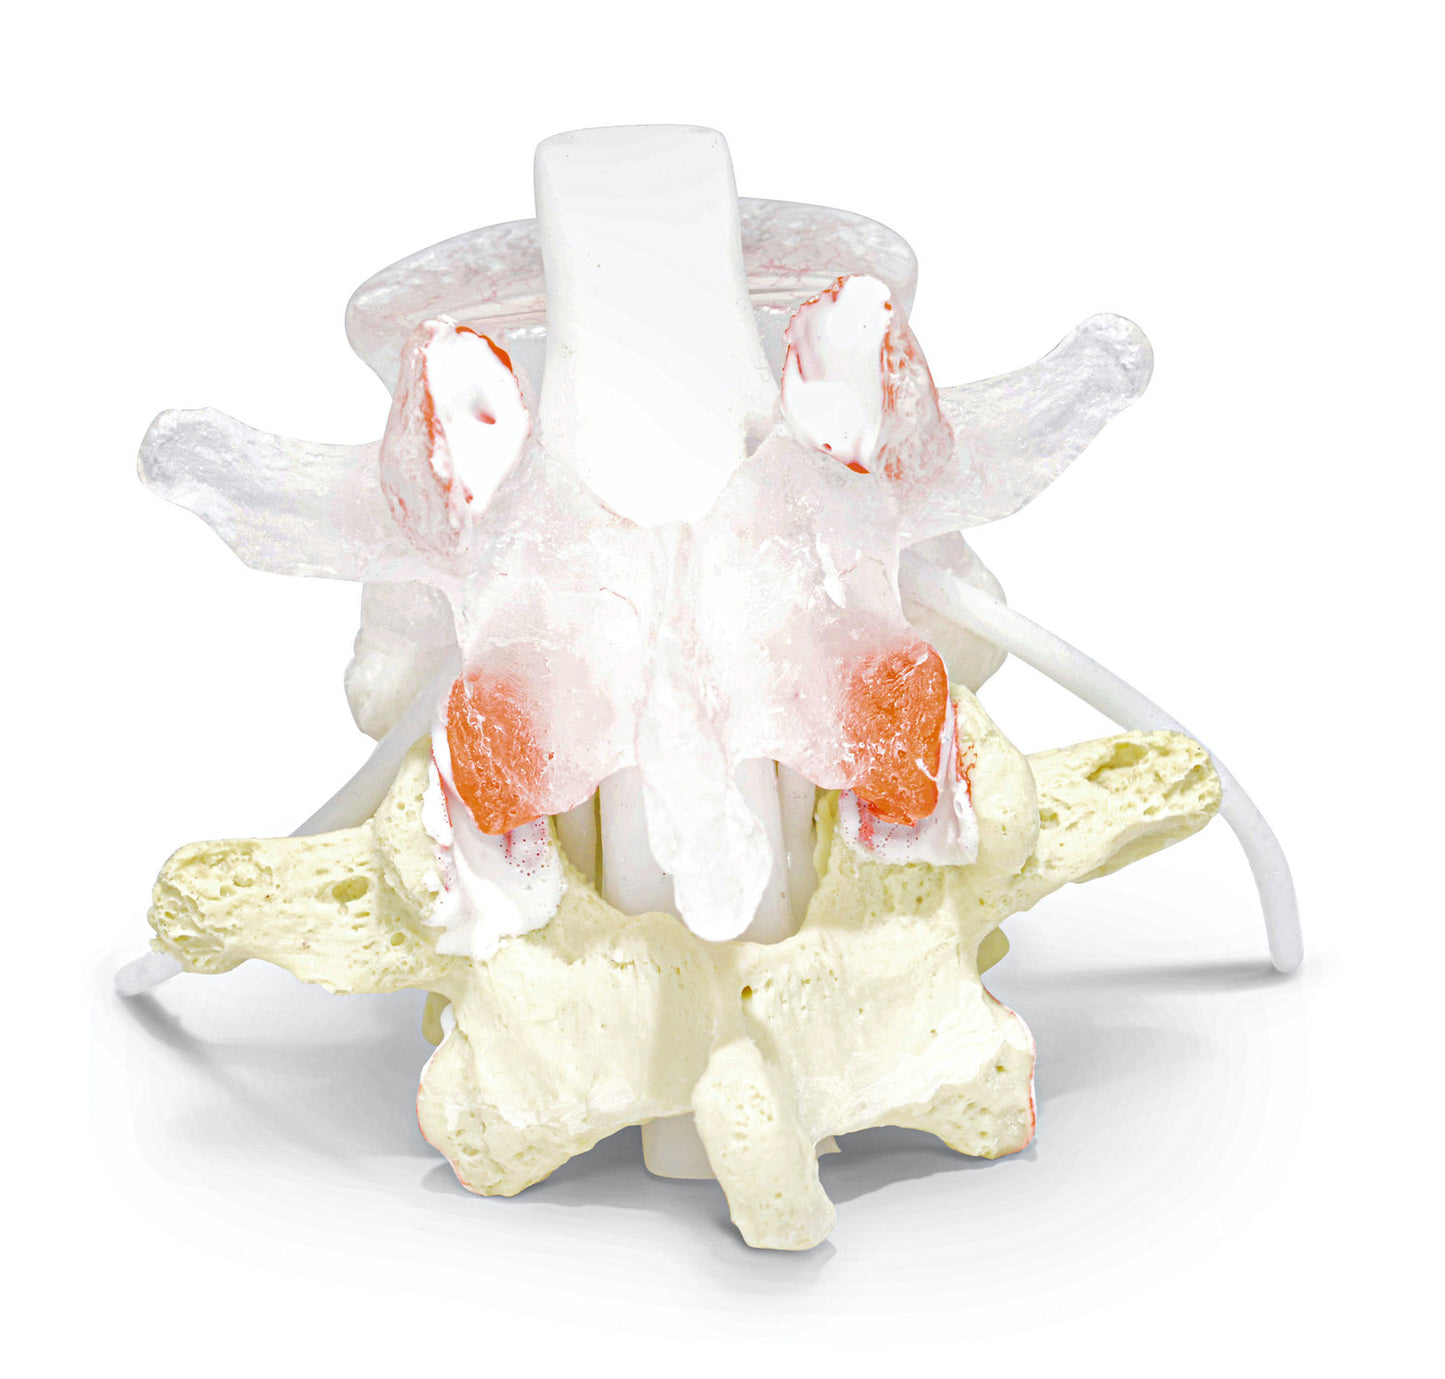 Dynamic spine model of 2 lumbar vertebrae showing a herniated disc. Extra learning-friendly